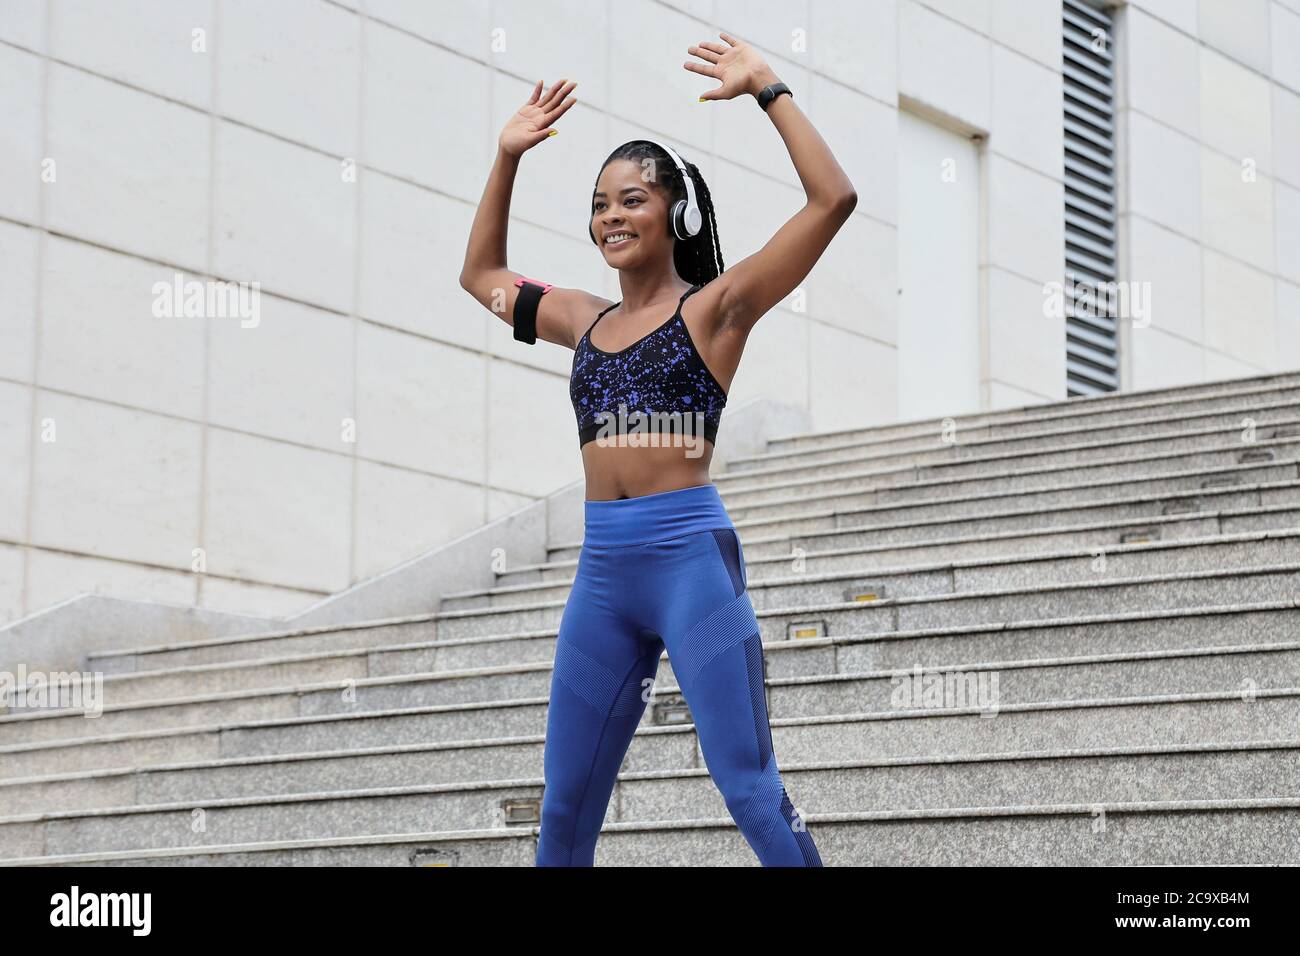 Smiling fit pretty young Black woman doing jumping jacks exercise to warm up before training Stock Photo